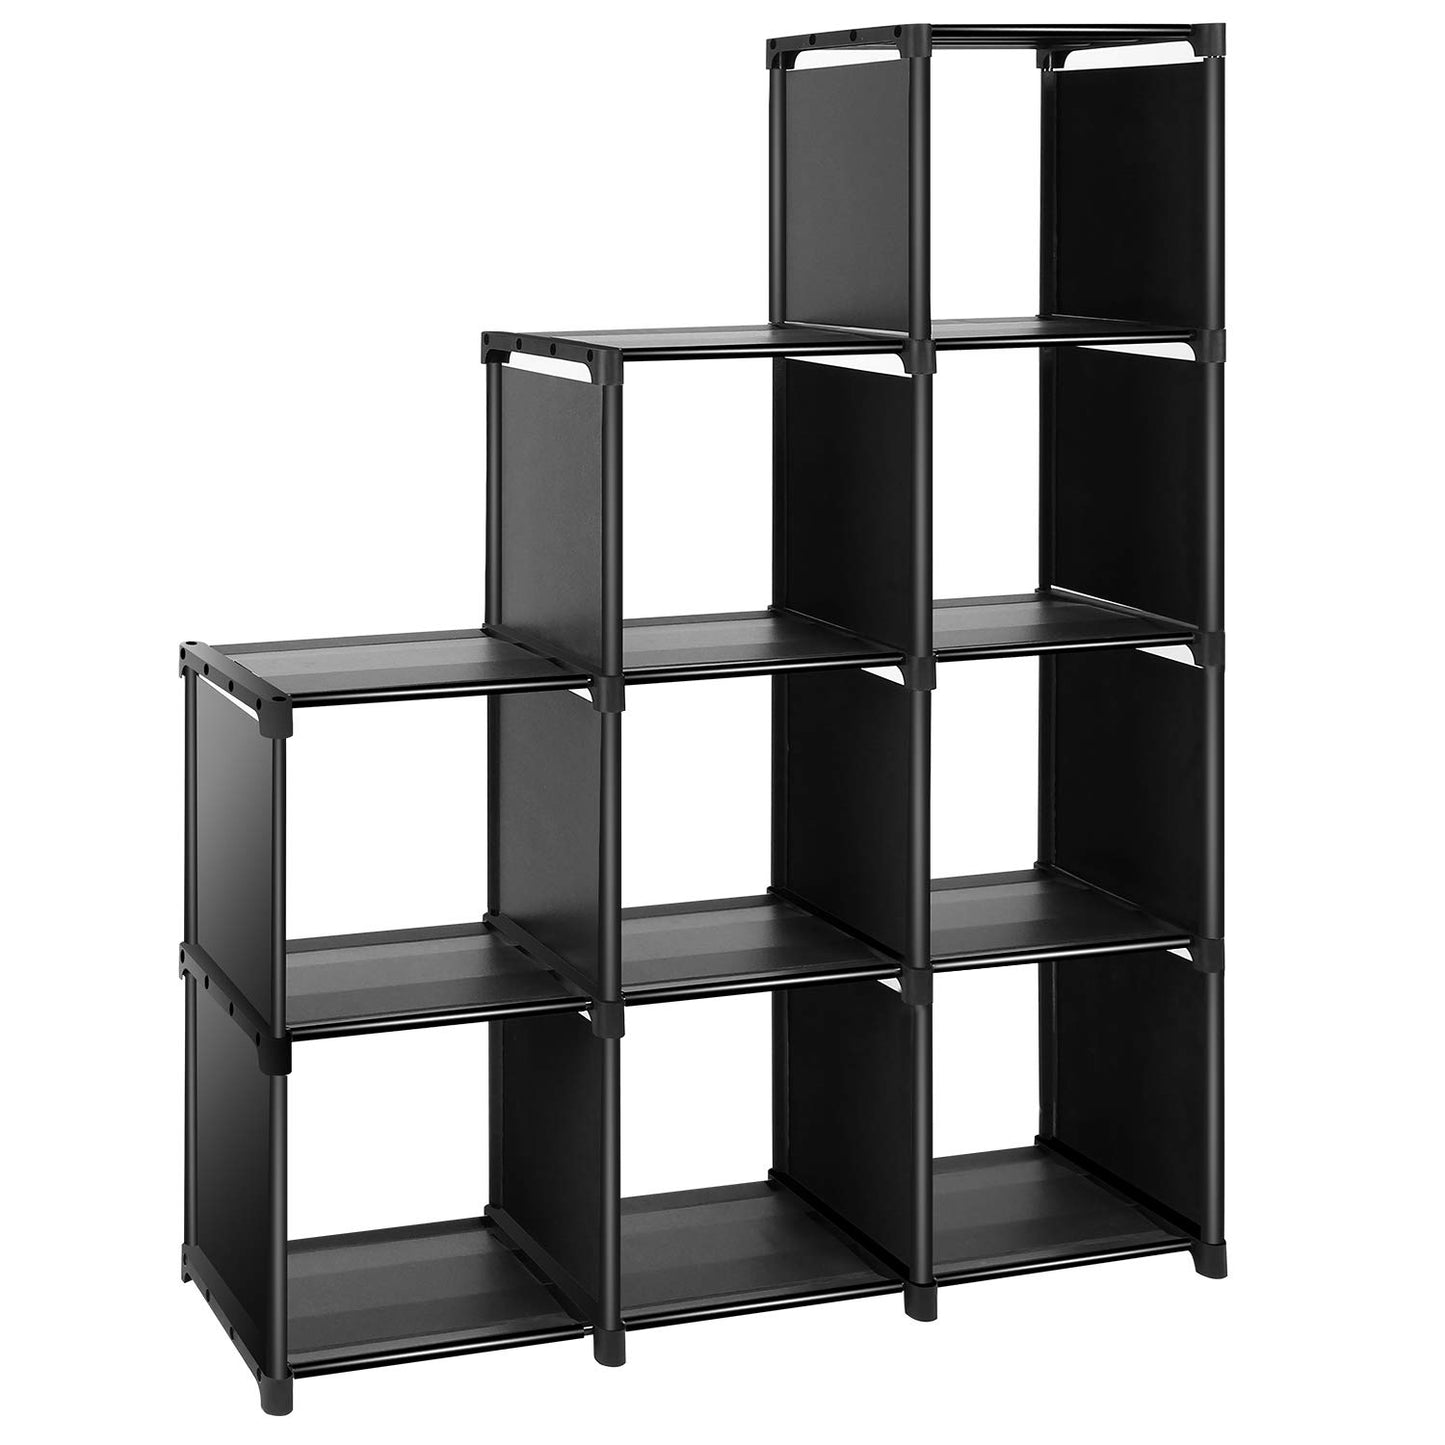 TomCare Cube Storage 9-Cube Closet Organizer Cube Organizer Storage Shelves Bookcase Bookshelf Clothes Cabinets Storage Cubes Bins Cubbies Shelving for Bedroom Living Room Office, Black